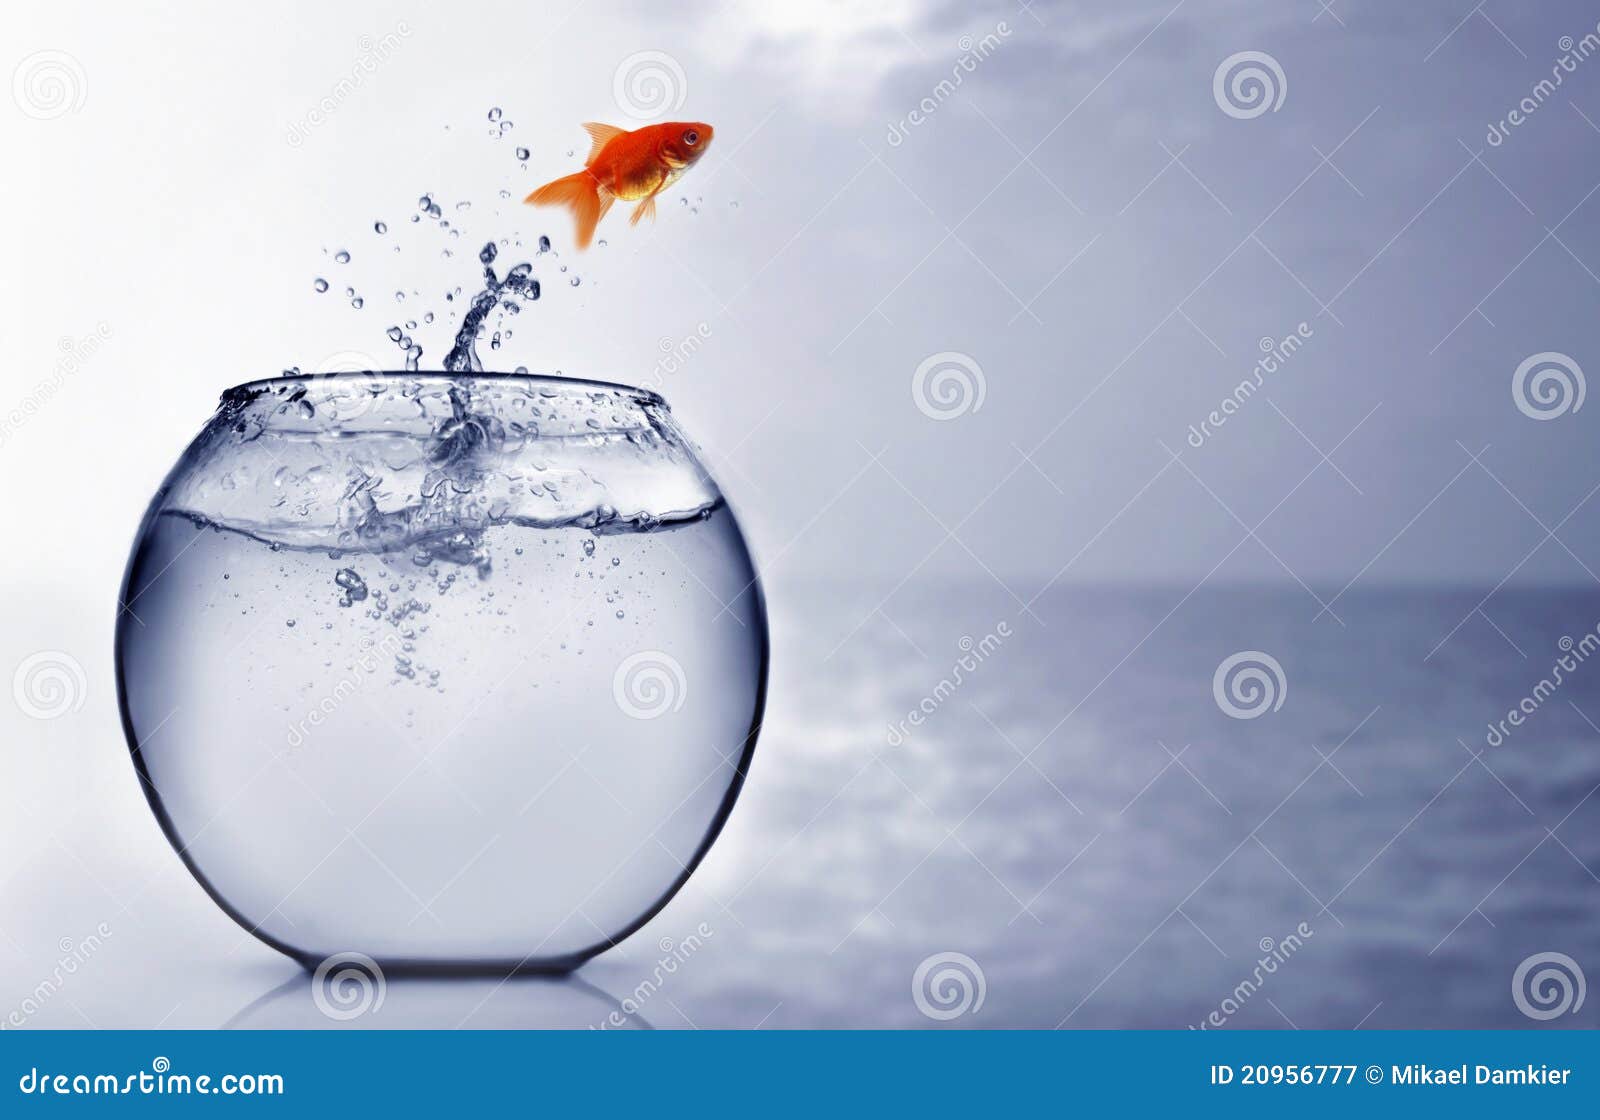 goldfish jumping into the sea